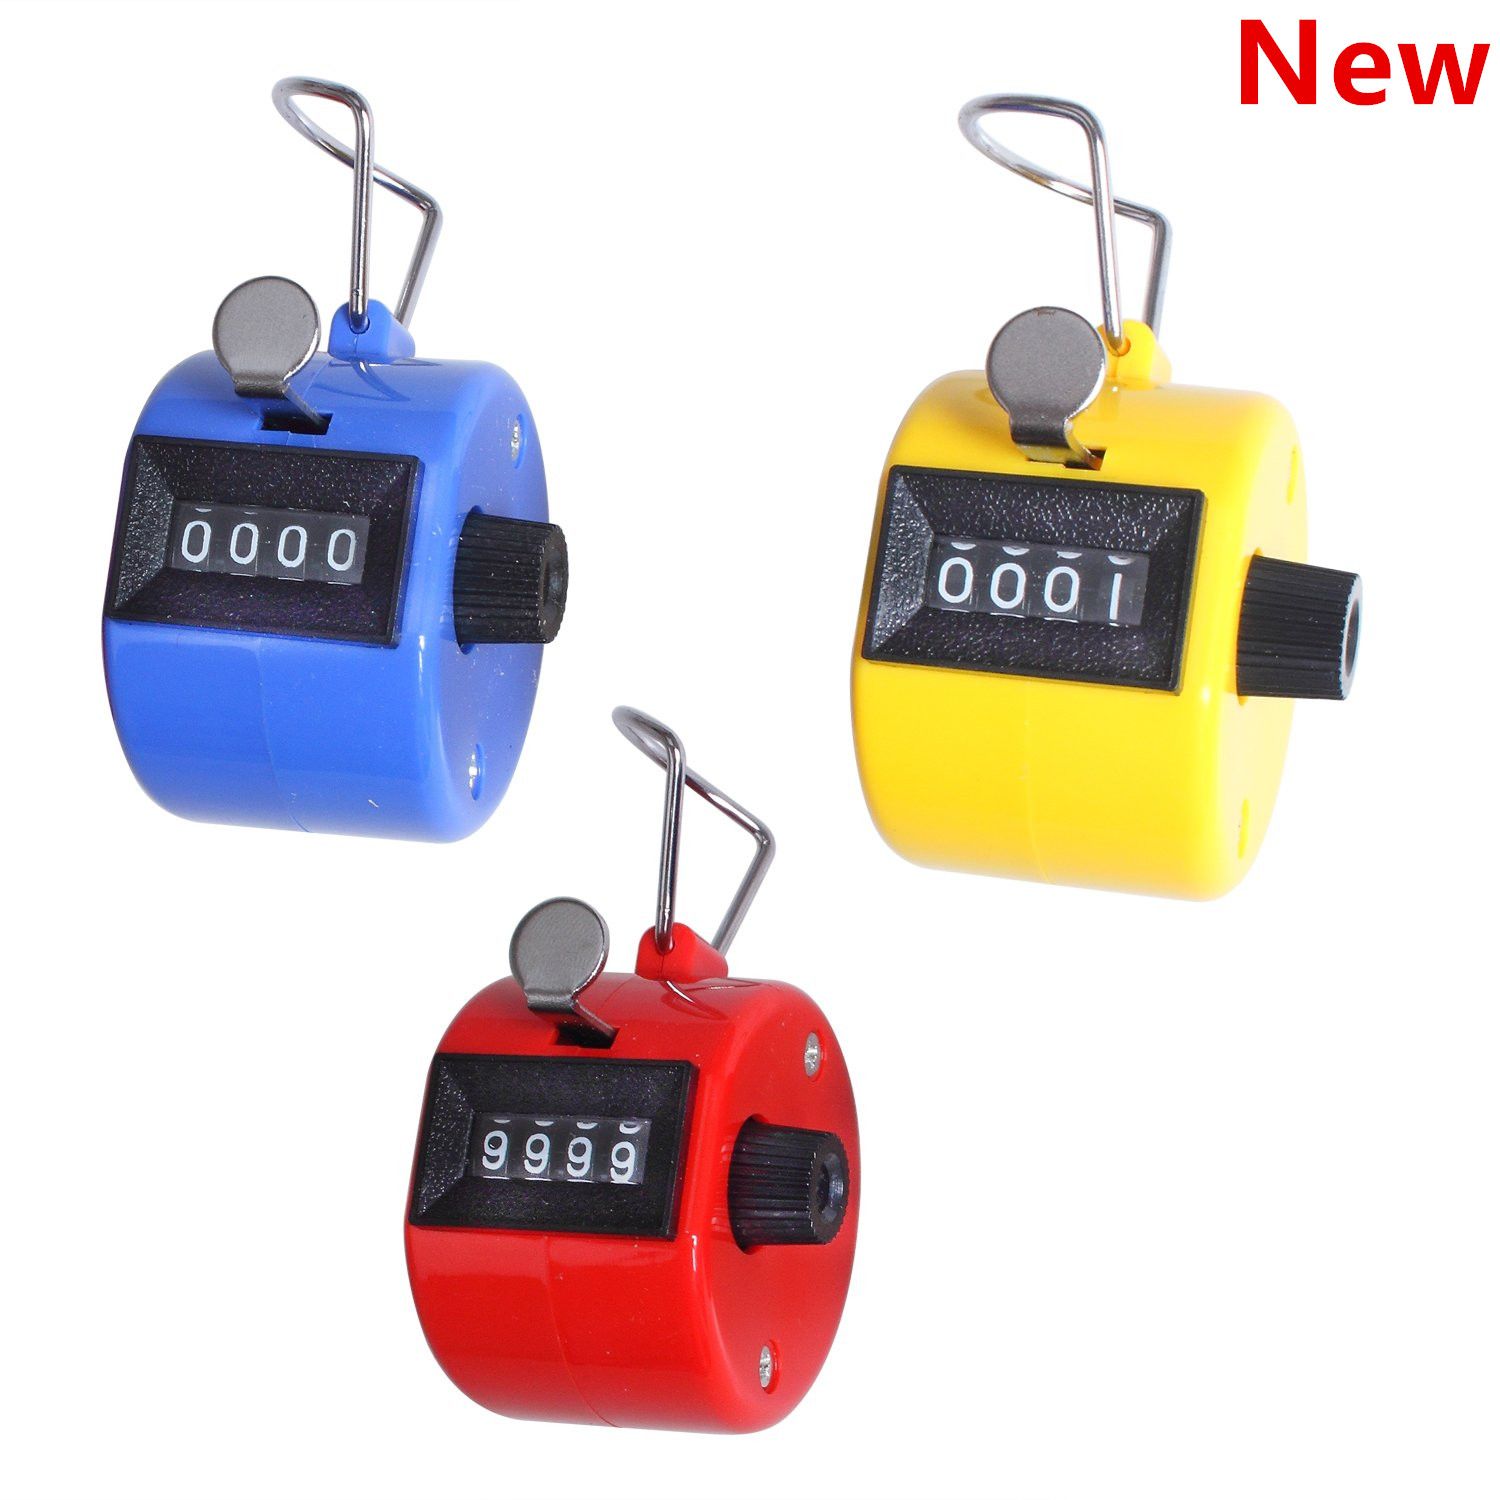 4 Digit Counters Mechanical Counter Manual Clicking Hand Counter